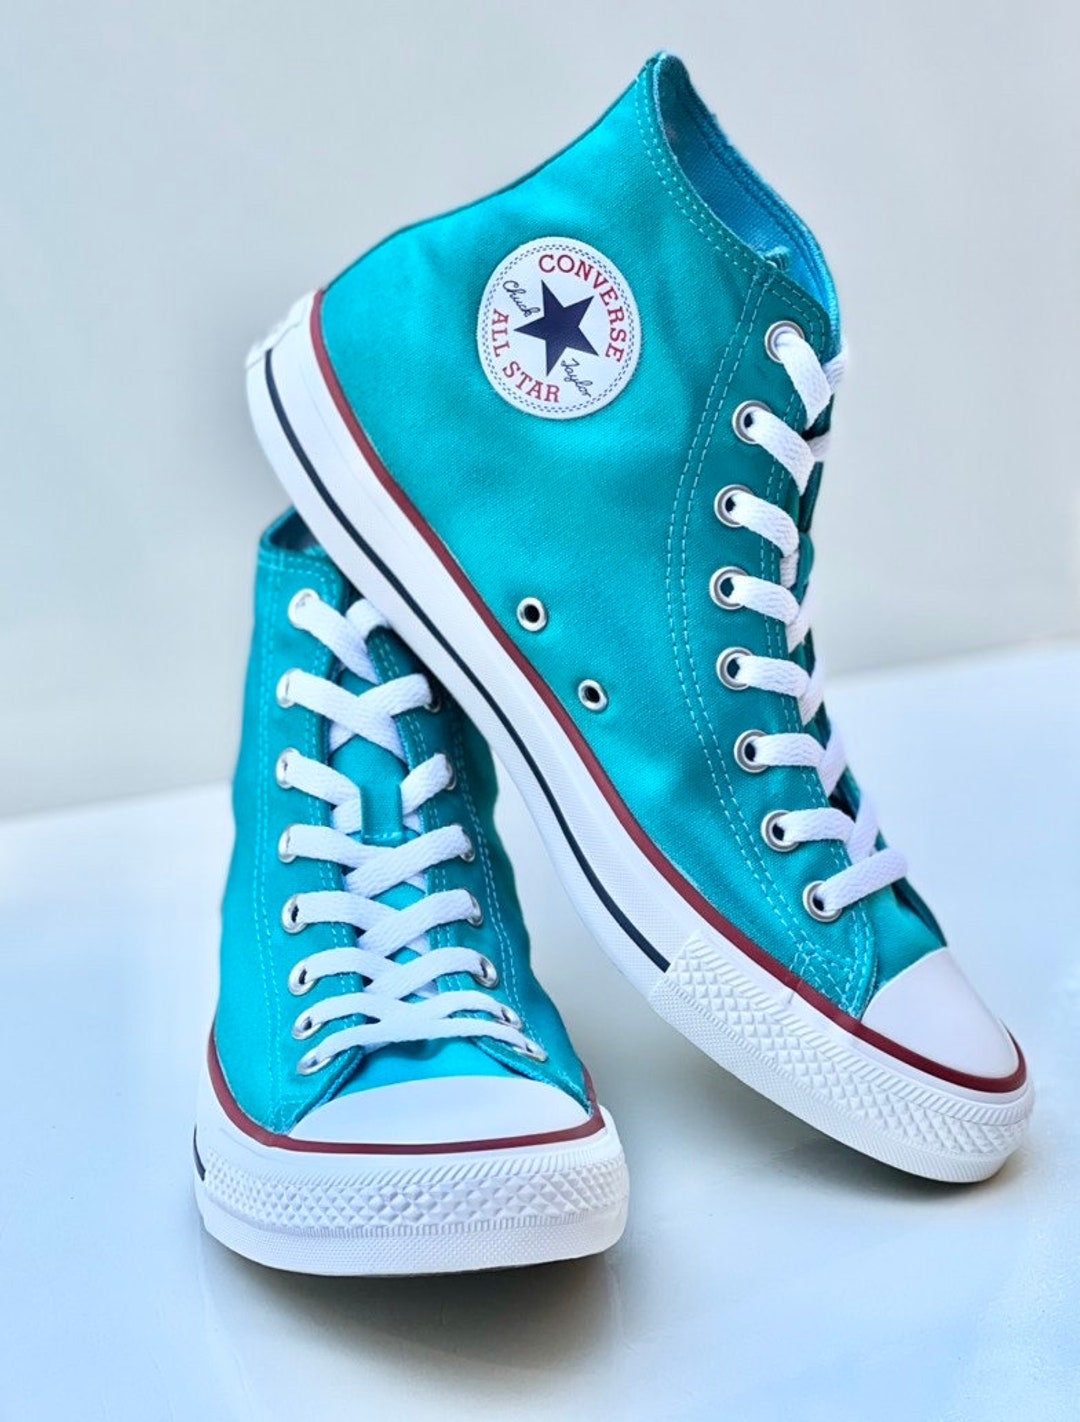 Custom Dyed Teal Converse All Star High Tops Shoes - Etsy